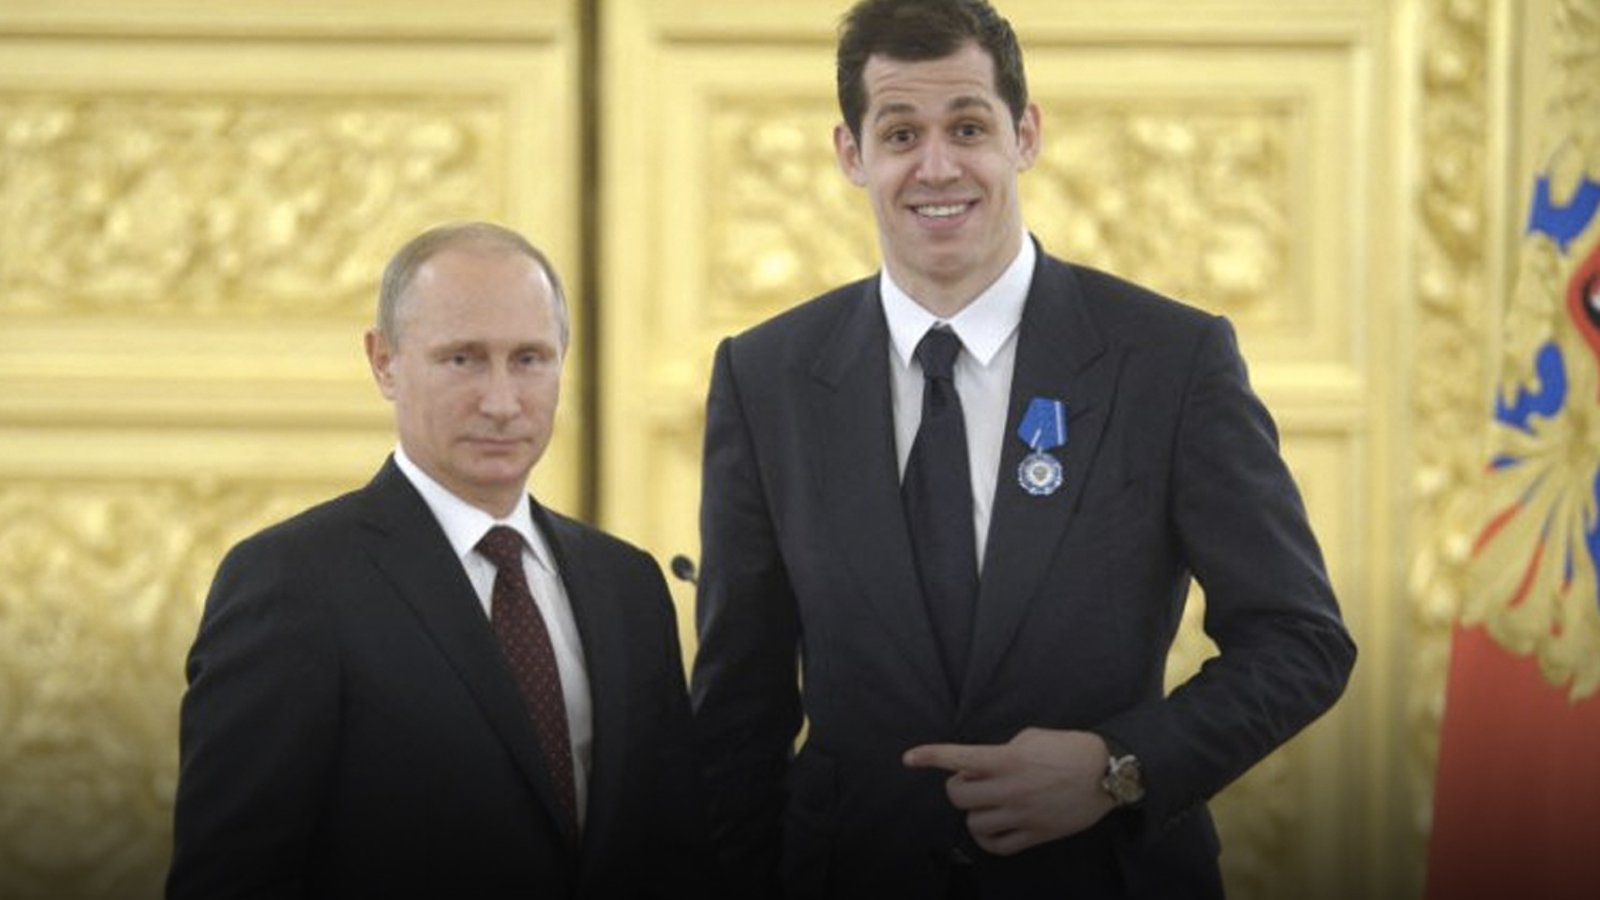 Report: Malkin speaks out about his support for “Putin team”